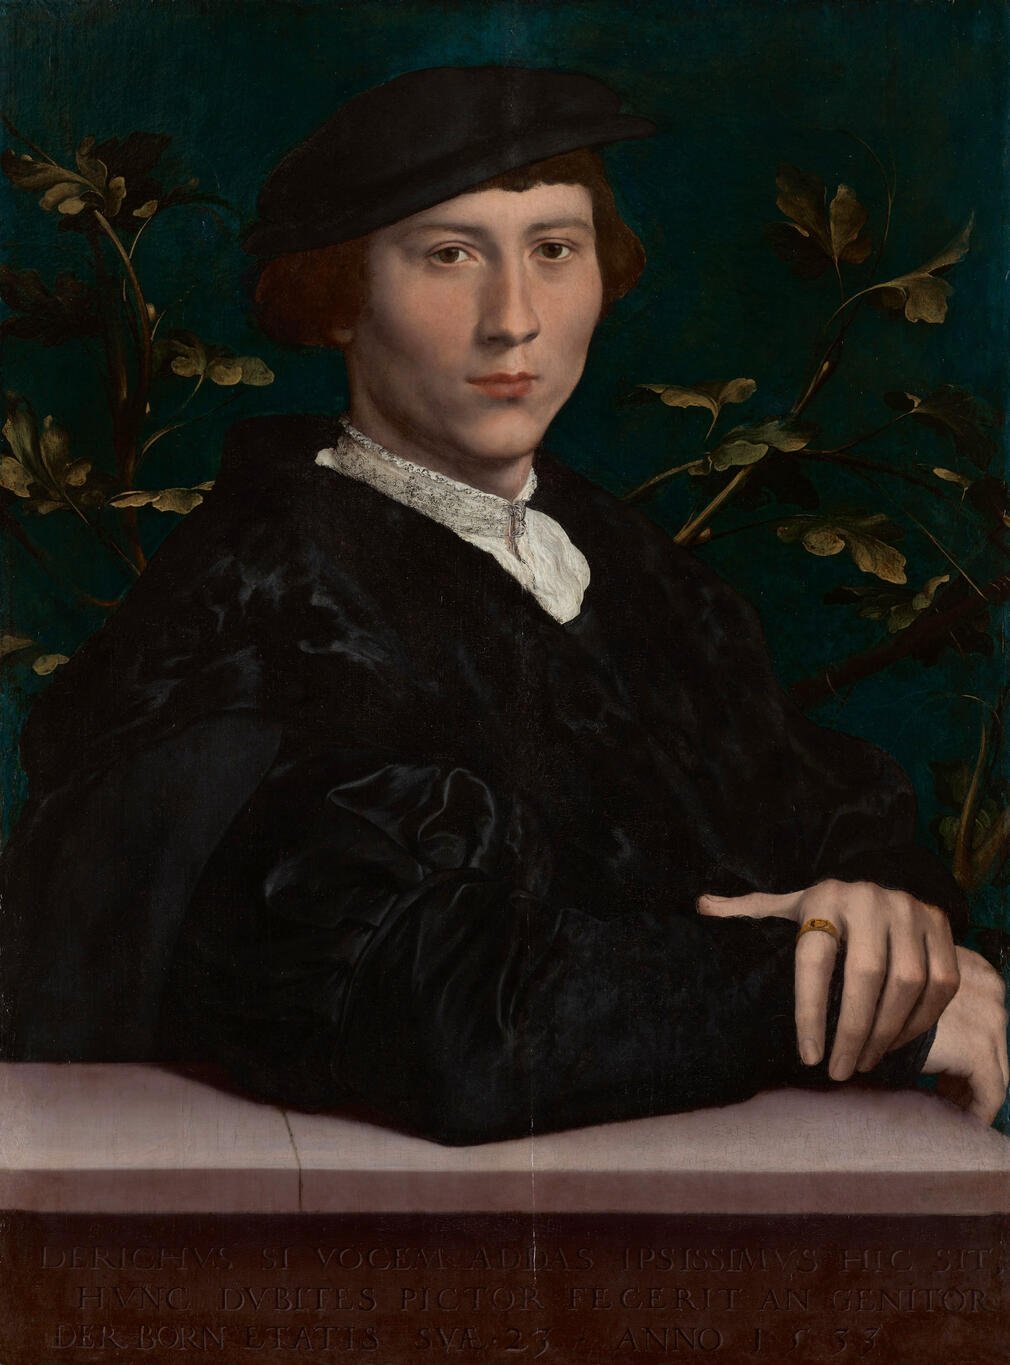 Painting of a Tudor man wearing a black hat. He is sitting facing the viewer and crossing his hands.